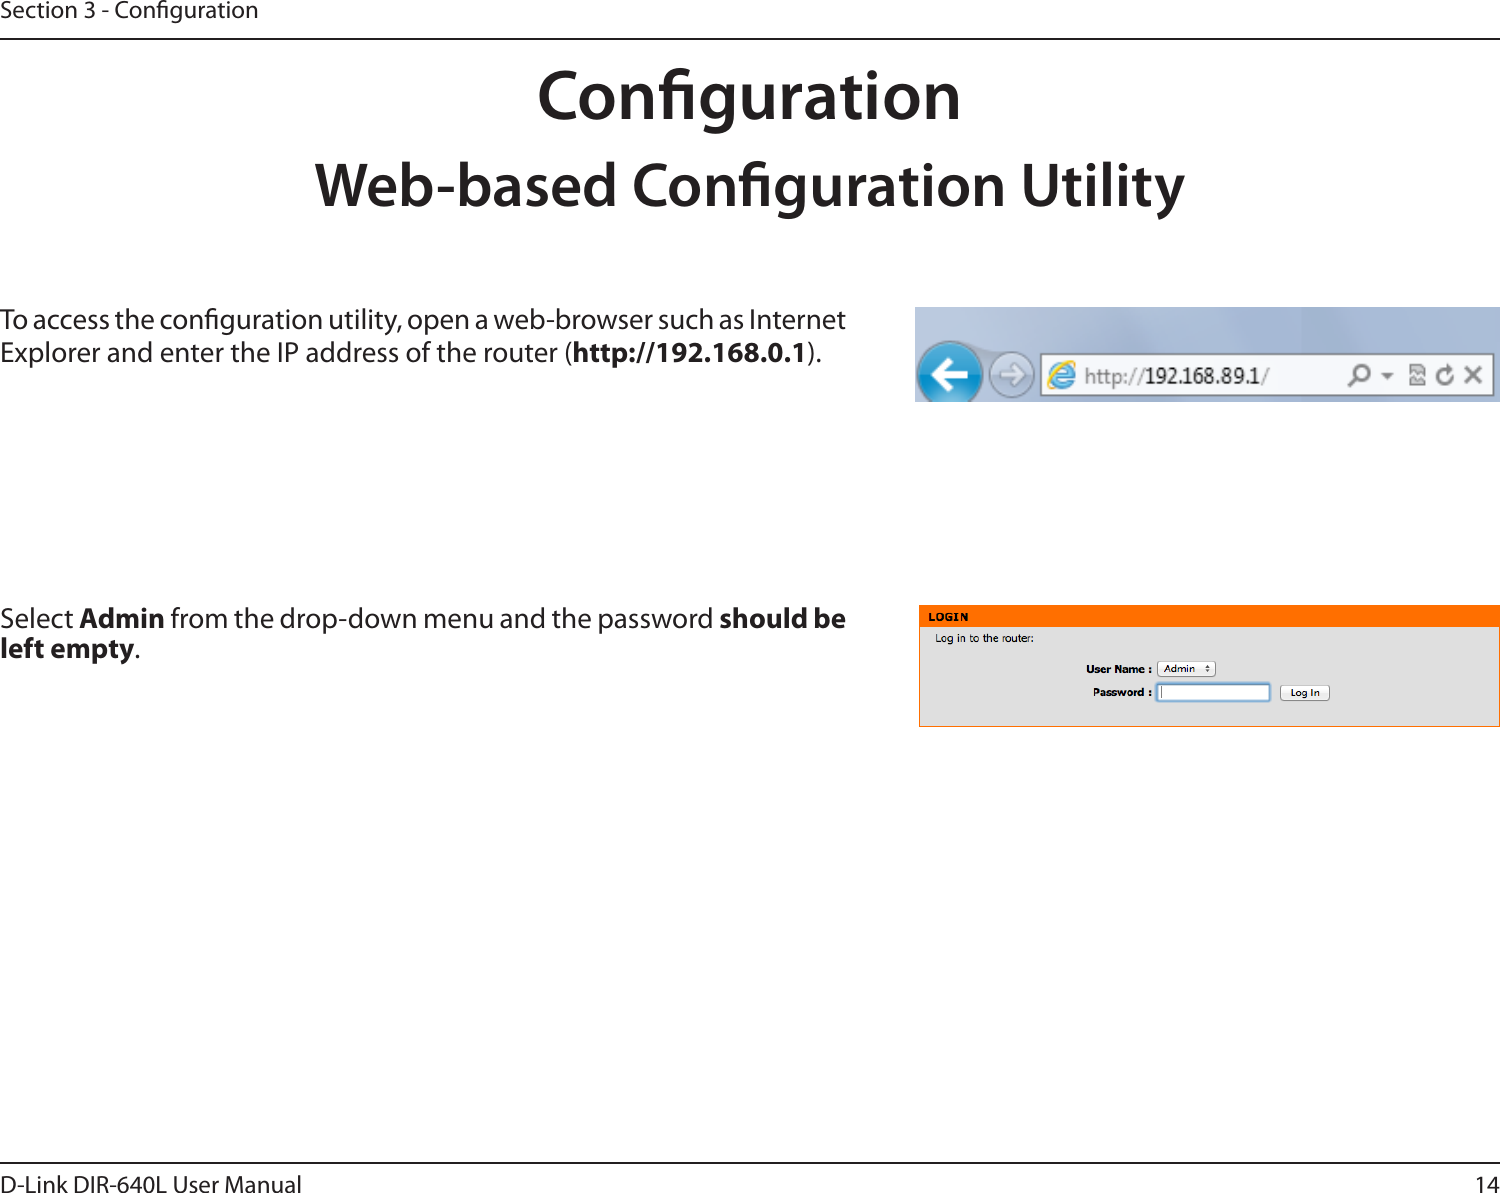 14D-Link DIR-640L User ManualSection 3 - CongurationWeb-based Conguration UtilitySelect Admin from the drop-down menu and the password should be left empty.To access the conguration utility, open a web-browser such as Internet Explorer and enter the IP address of the router (http://192.168.0.1).Conguration